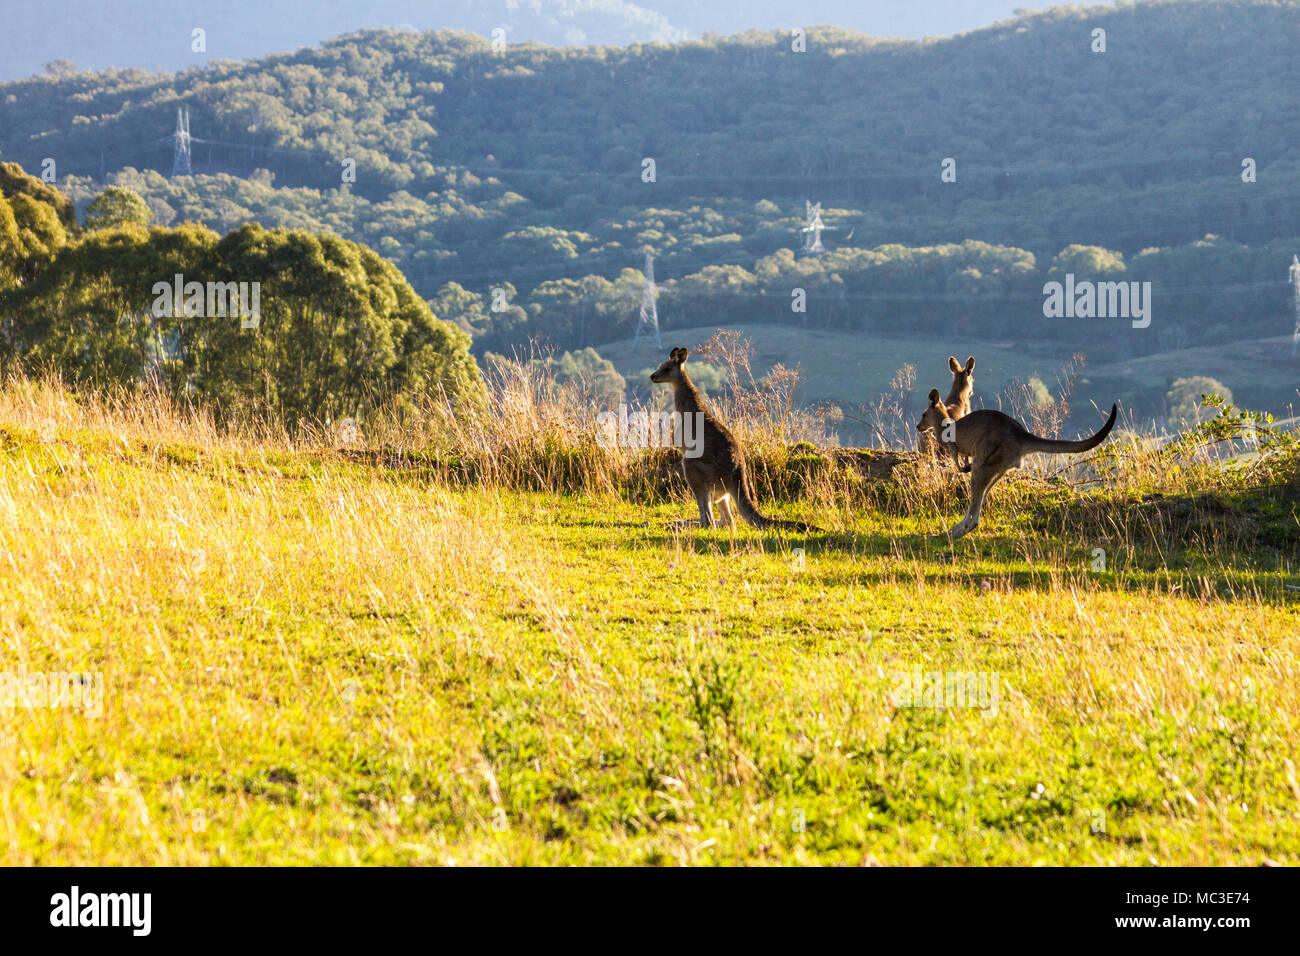 Kangaroos hopping on the edge of a mountain, lit by the sun with another mountain in the background Stock Photo